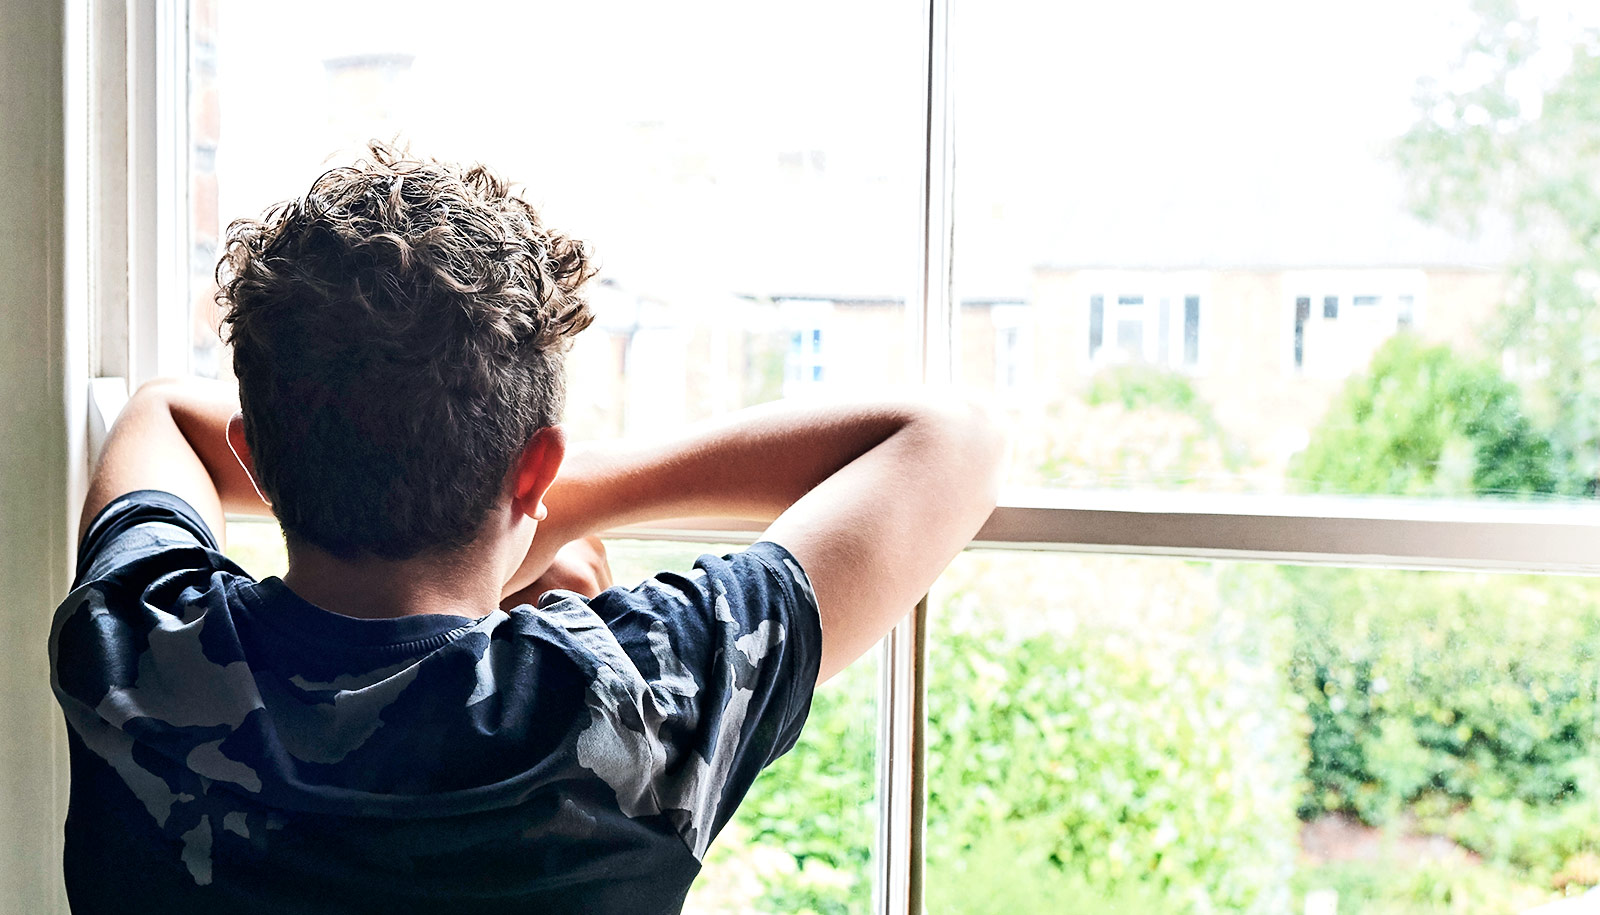 Young boy looking out a window